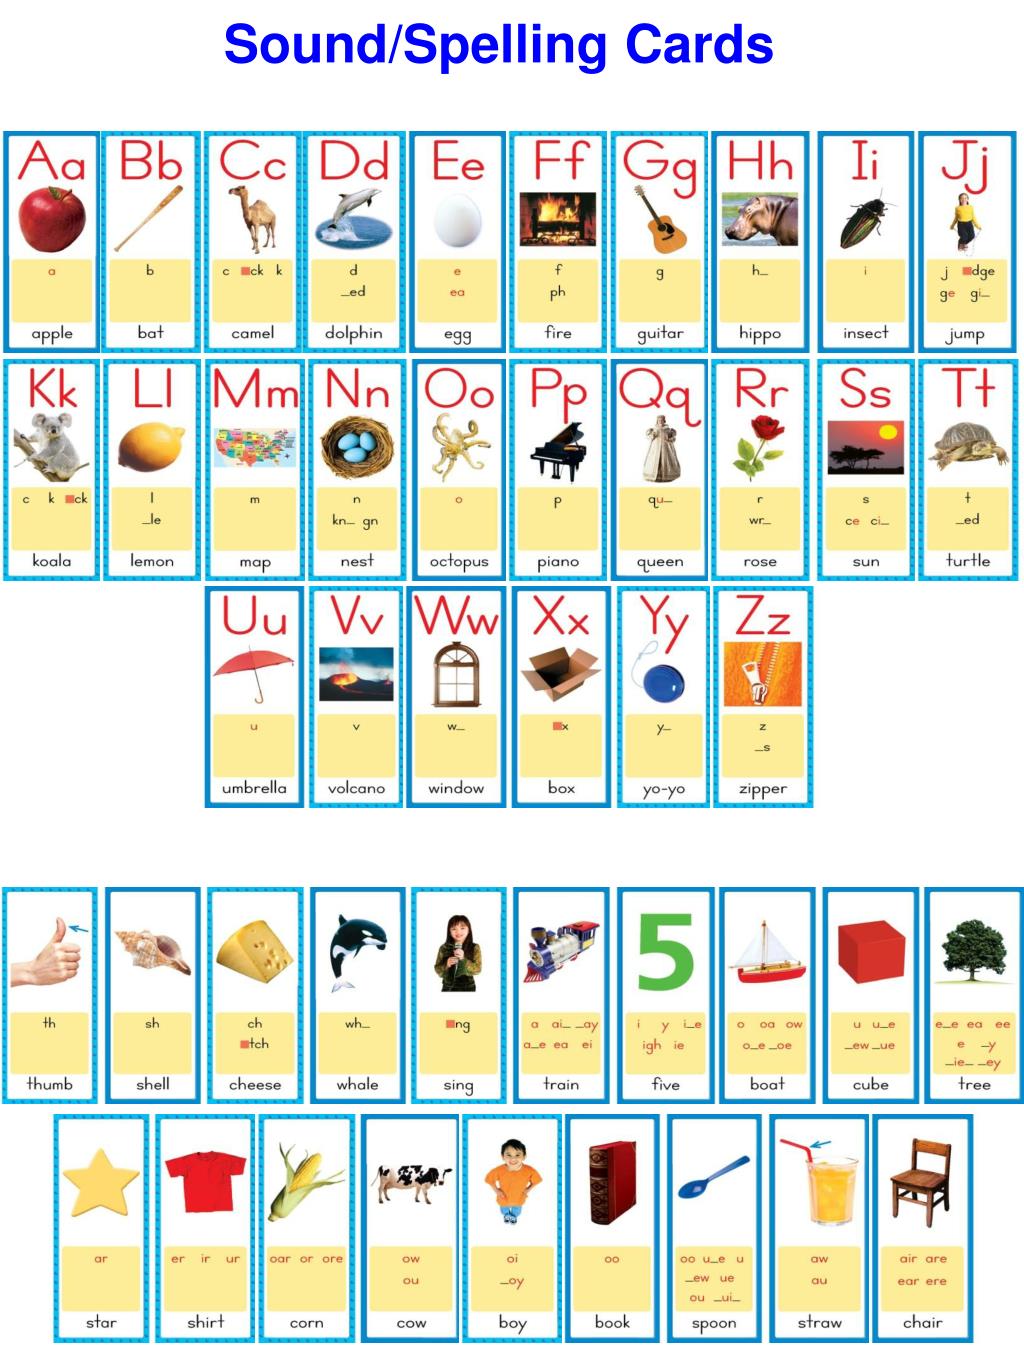 PPT Sound/Spelling Cards PowerPoint Presentation, free download ID